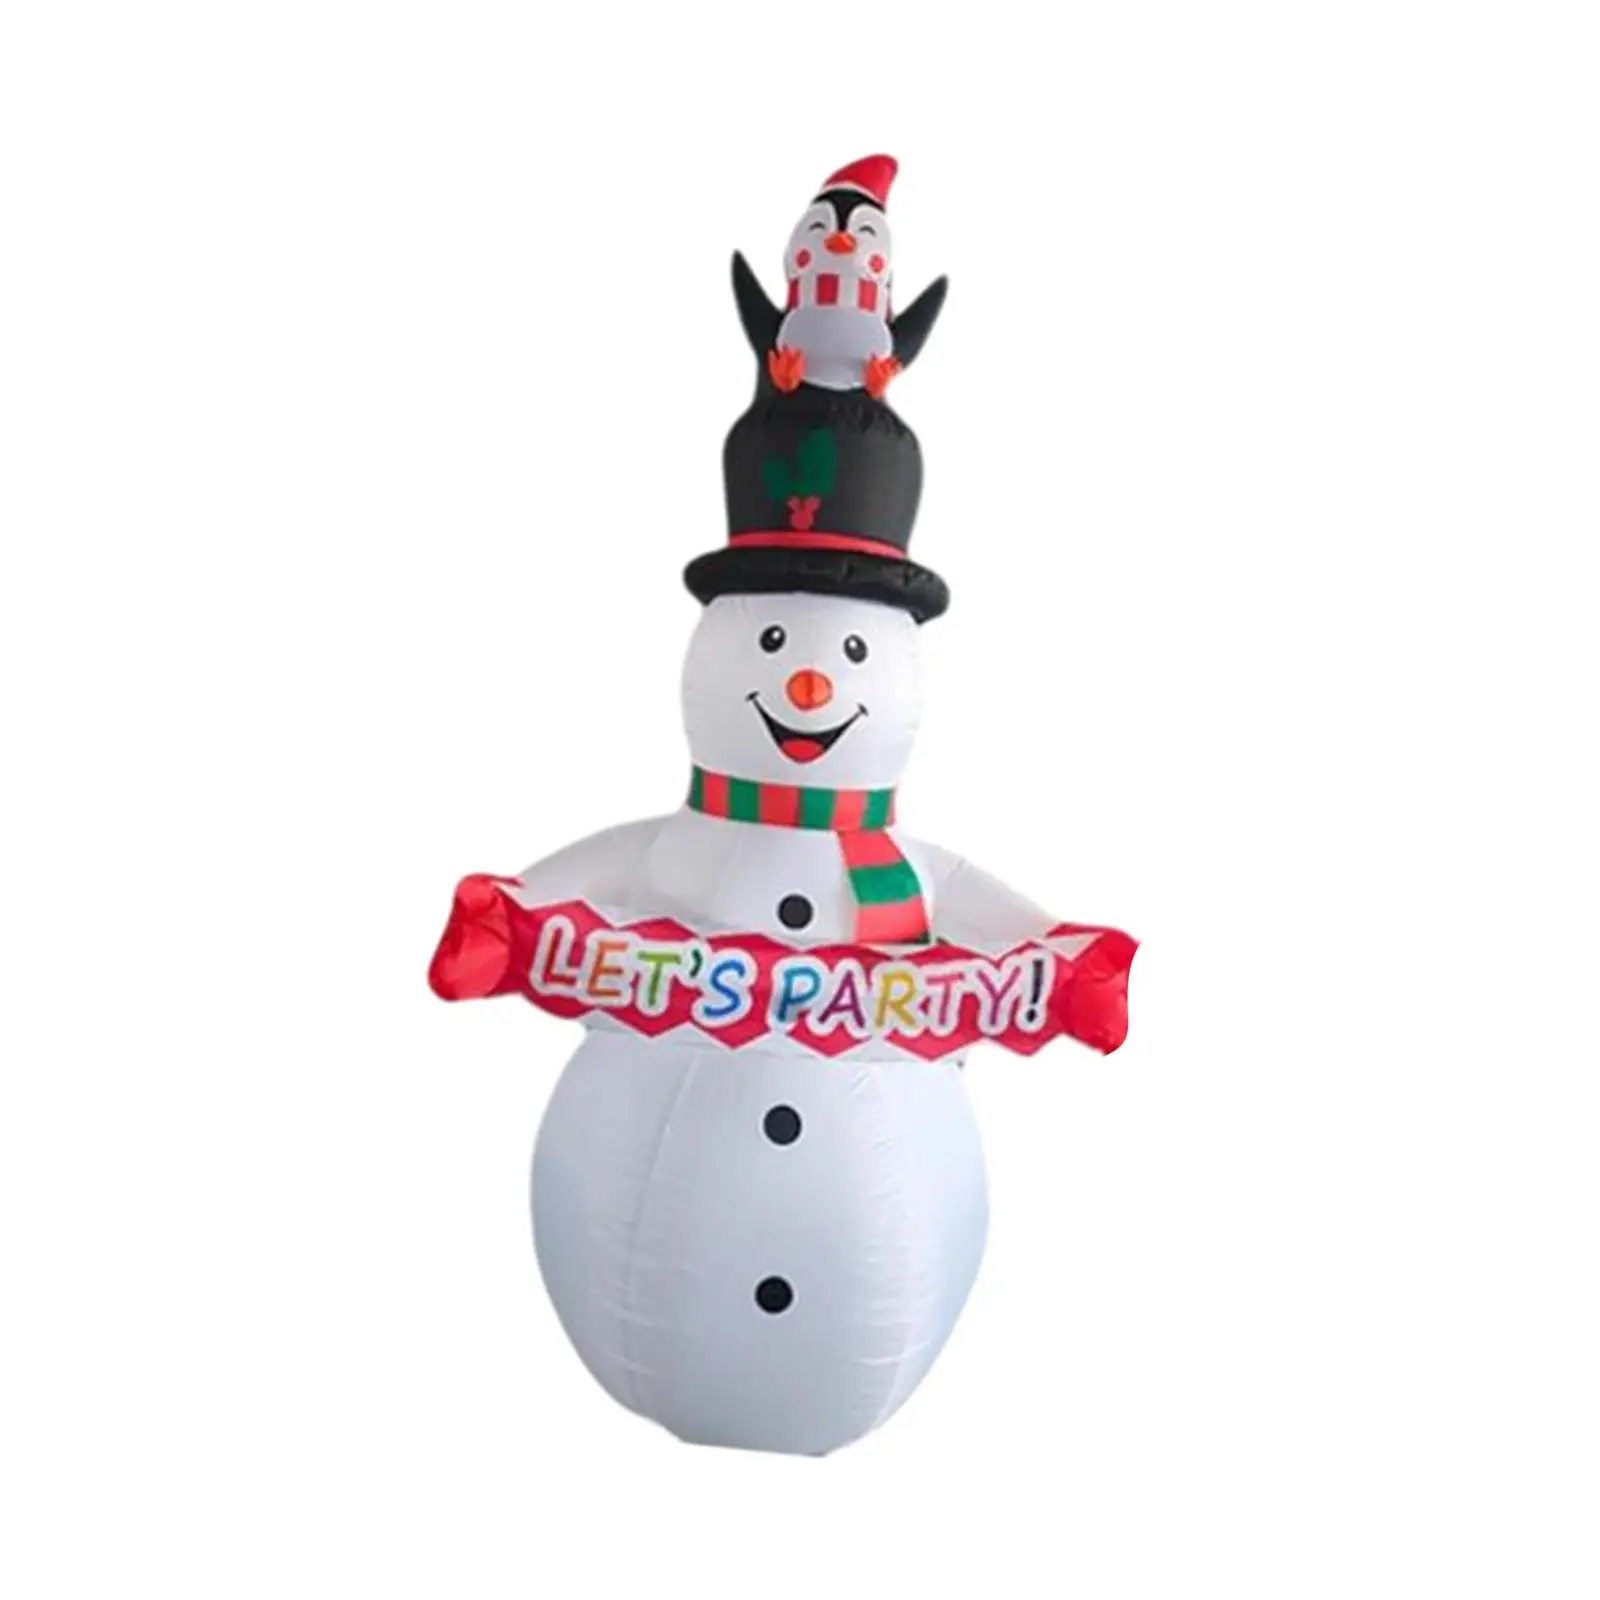 Inflatable Snowman Large Props Christmas Decoration Blow up Snowman Christmas Inflatables for Lawn Xmas Garden Holiday Yard